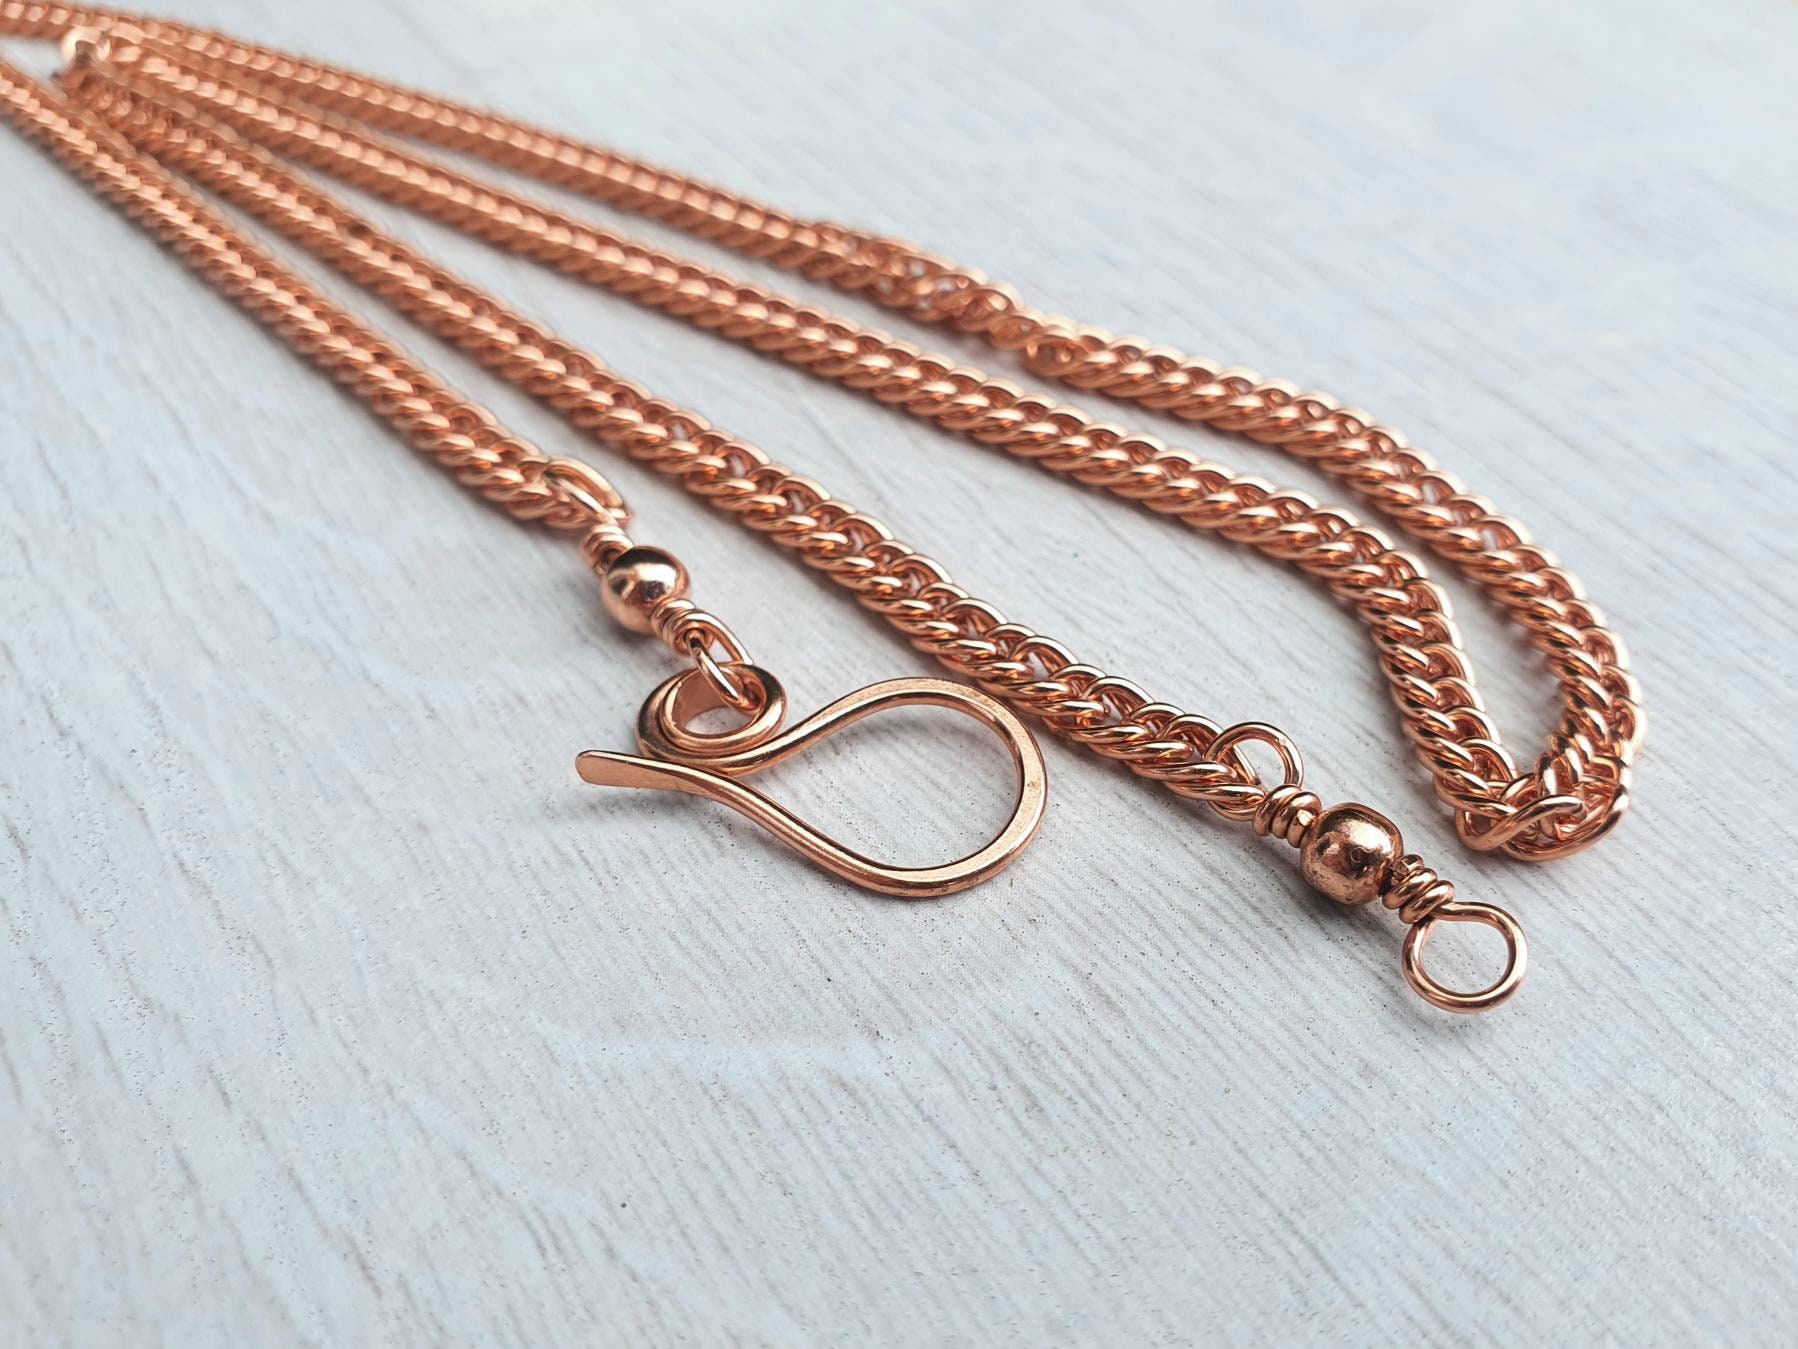 Pure Copper Snake Chain ,solid Copper Chain , Snake Chain Necklace, Dainty  Snake Chain Necklace, Thick Snake Necklace Gift for Her 